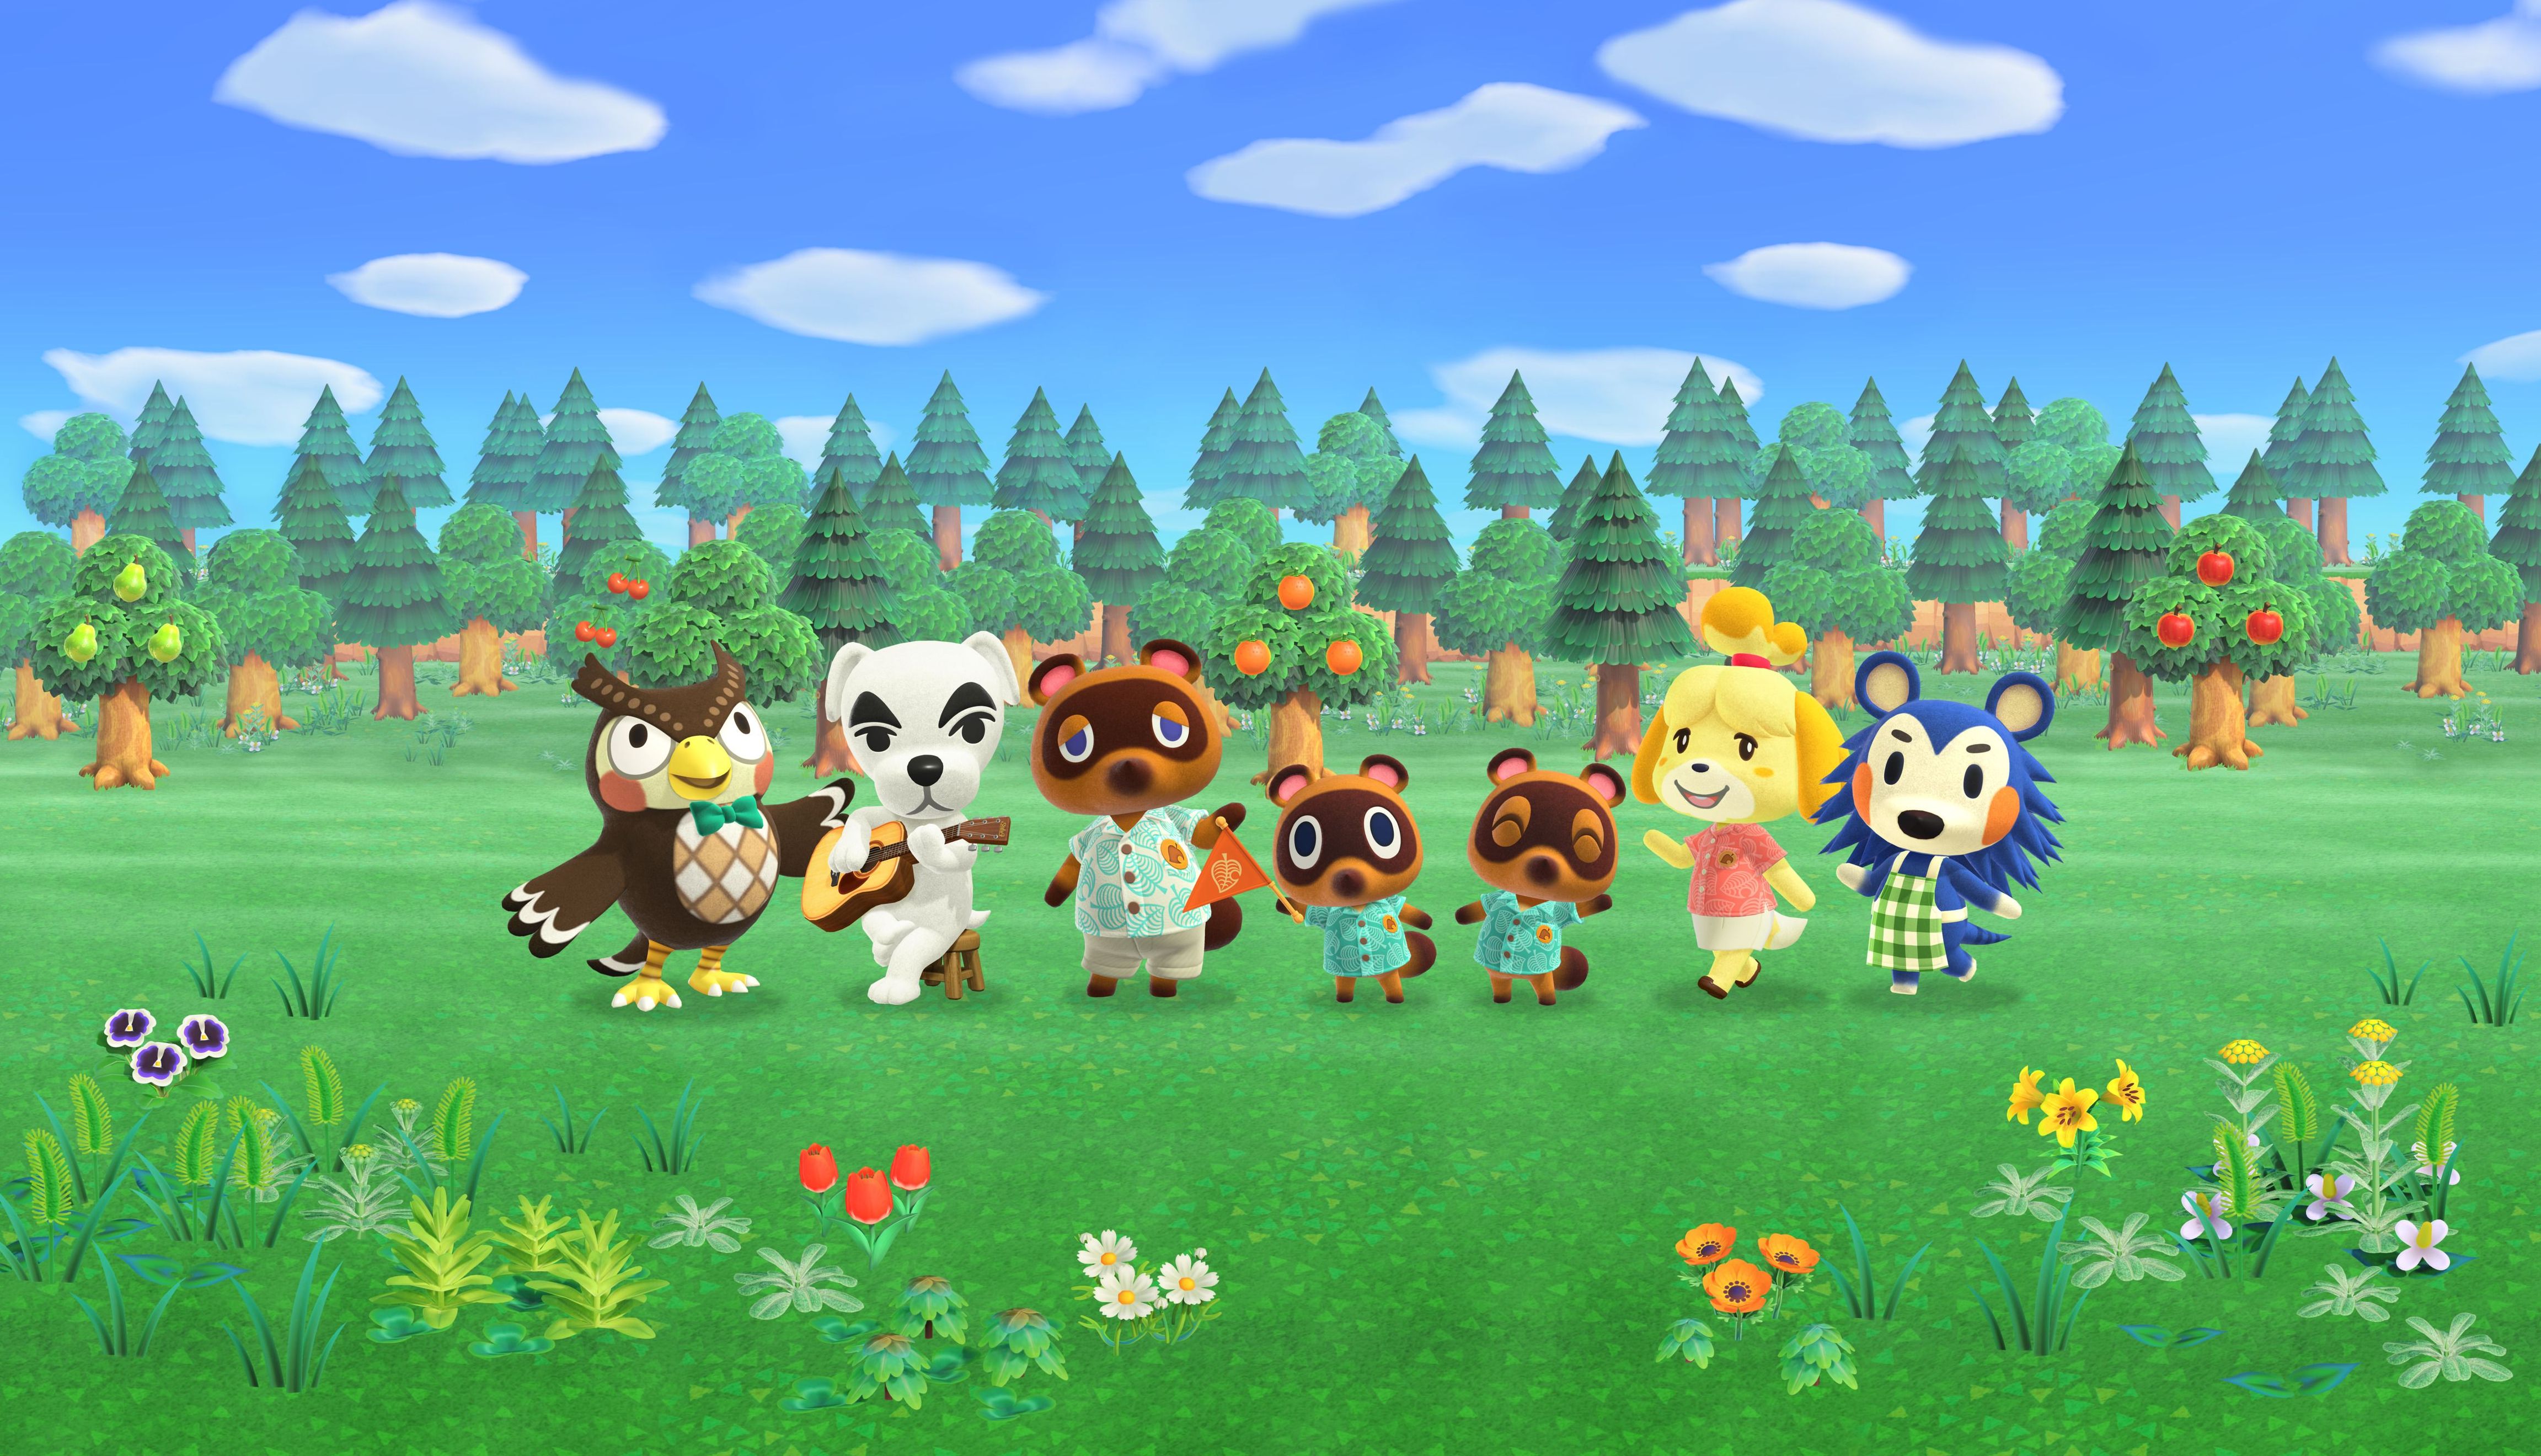 Image for The community who spend millions on Animal Crossing villager trading